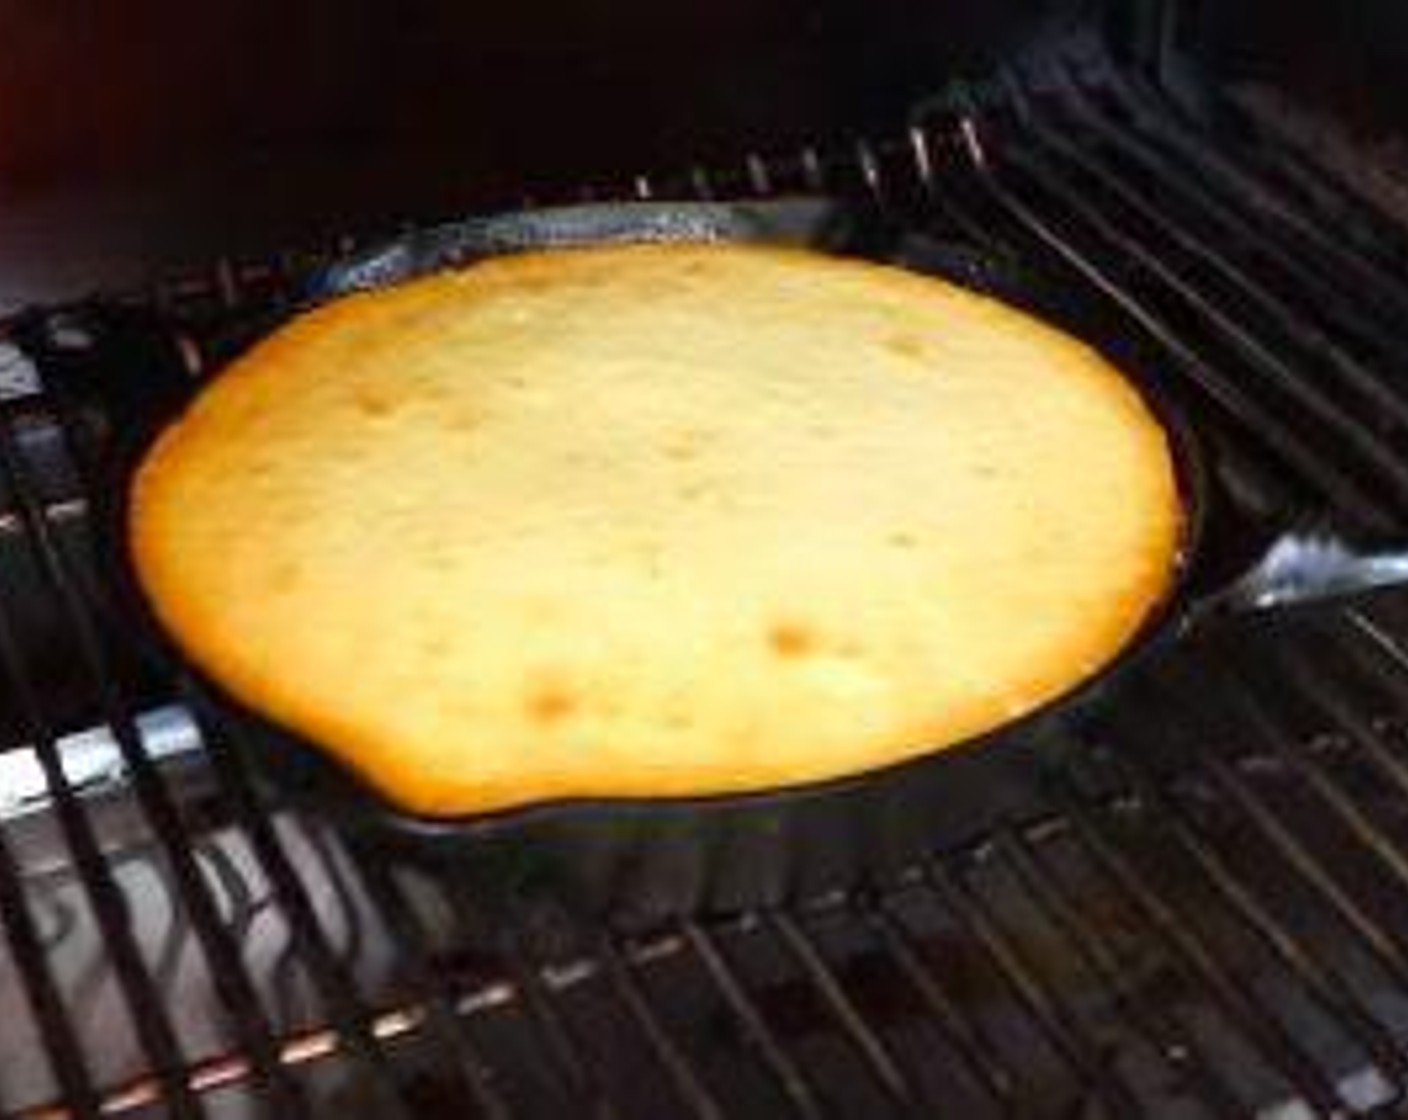 step 6 Pour cake batter into the iron skillet and place in the smoker. Cook for 45 minutes to 1 hour or until a toothpick inserted into center comes out clean.